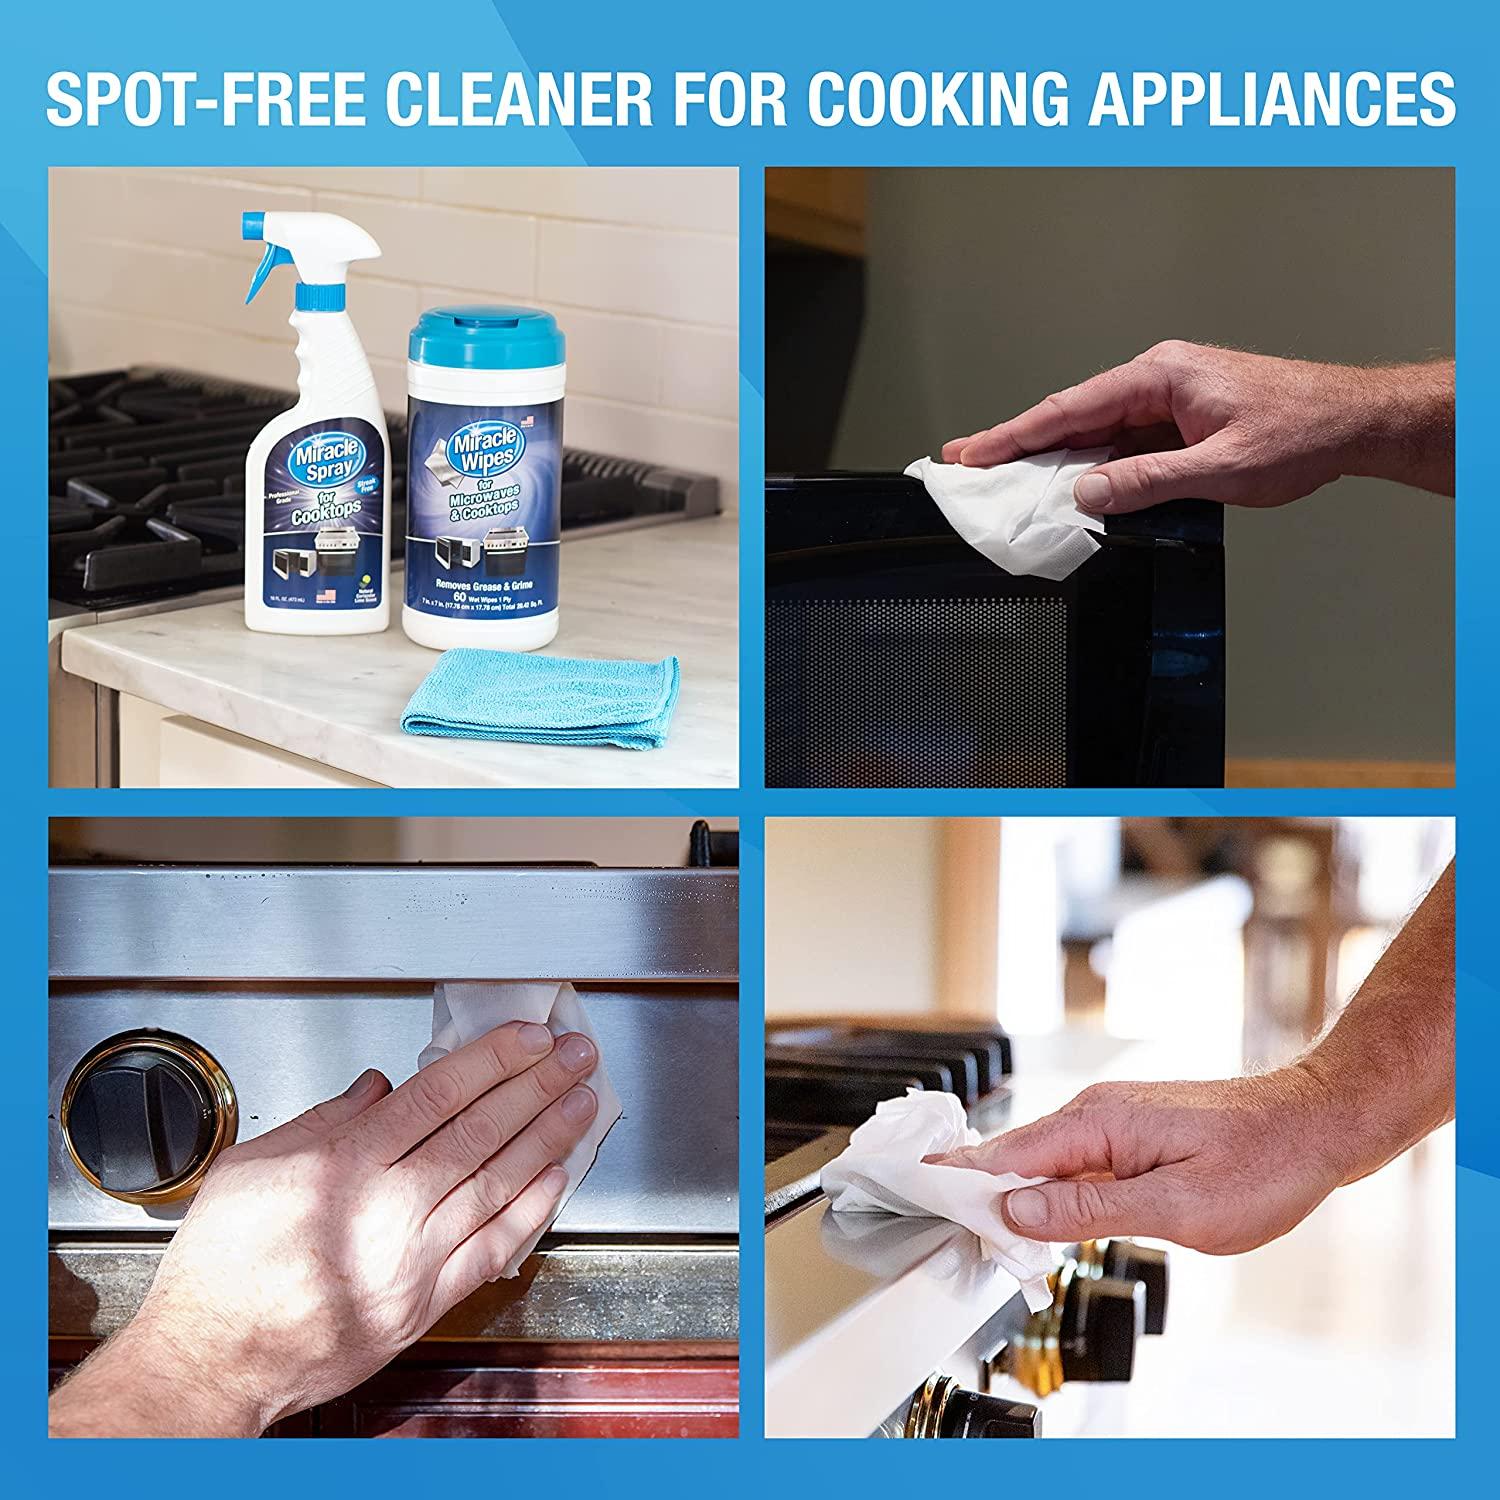 MiracleWipes for Microwaves and Cooktops, Easily Removes Food and